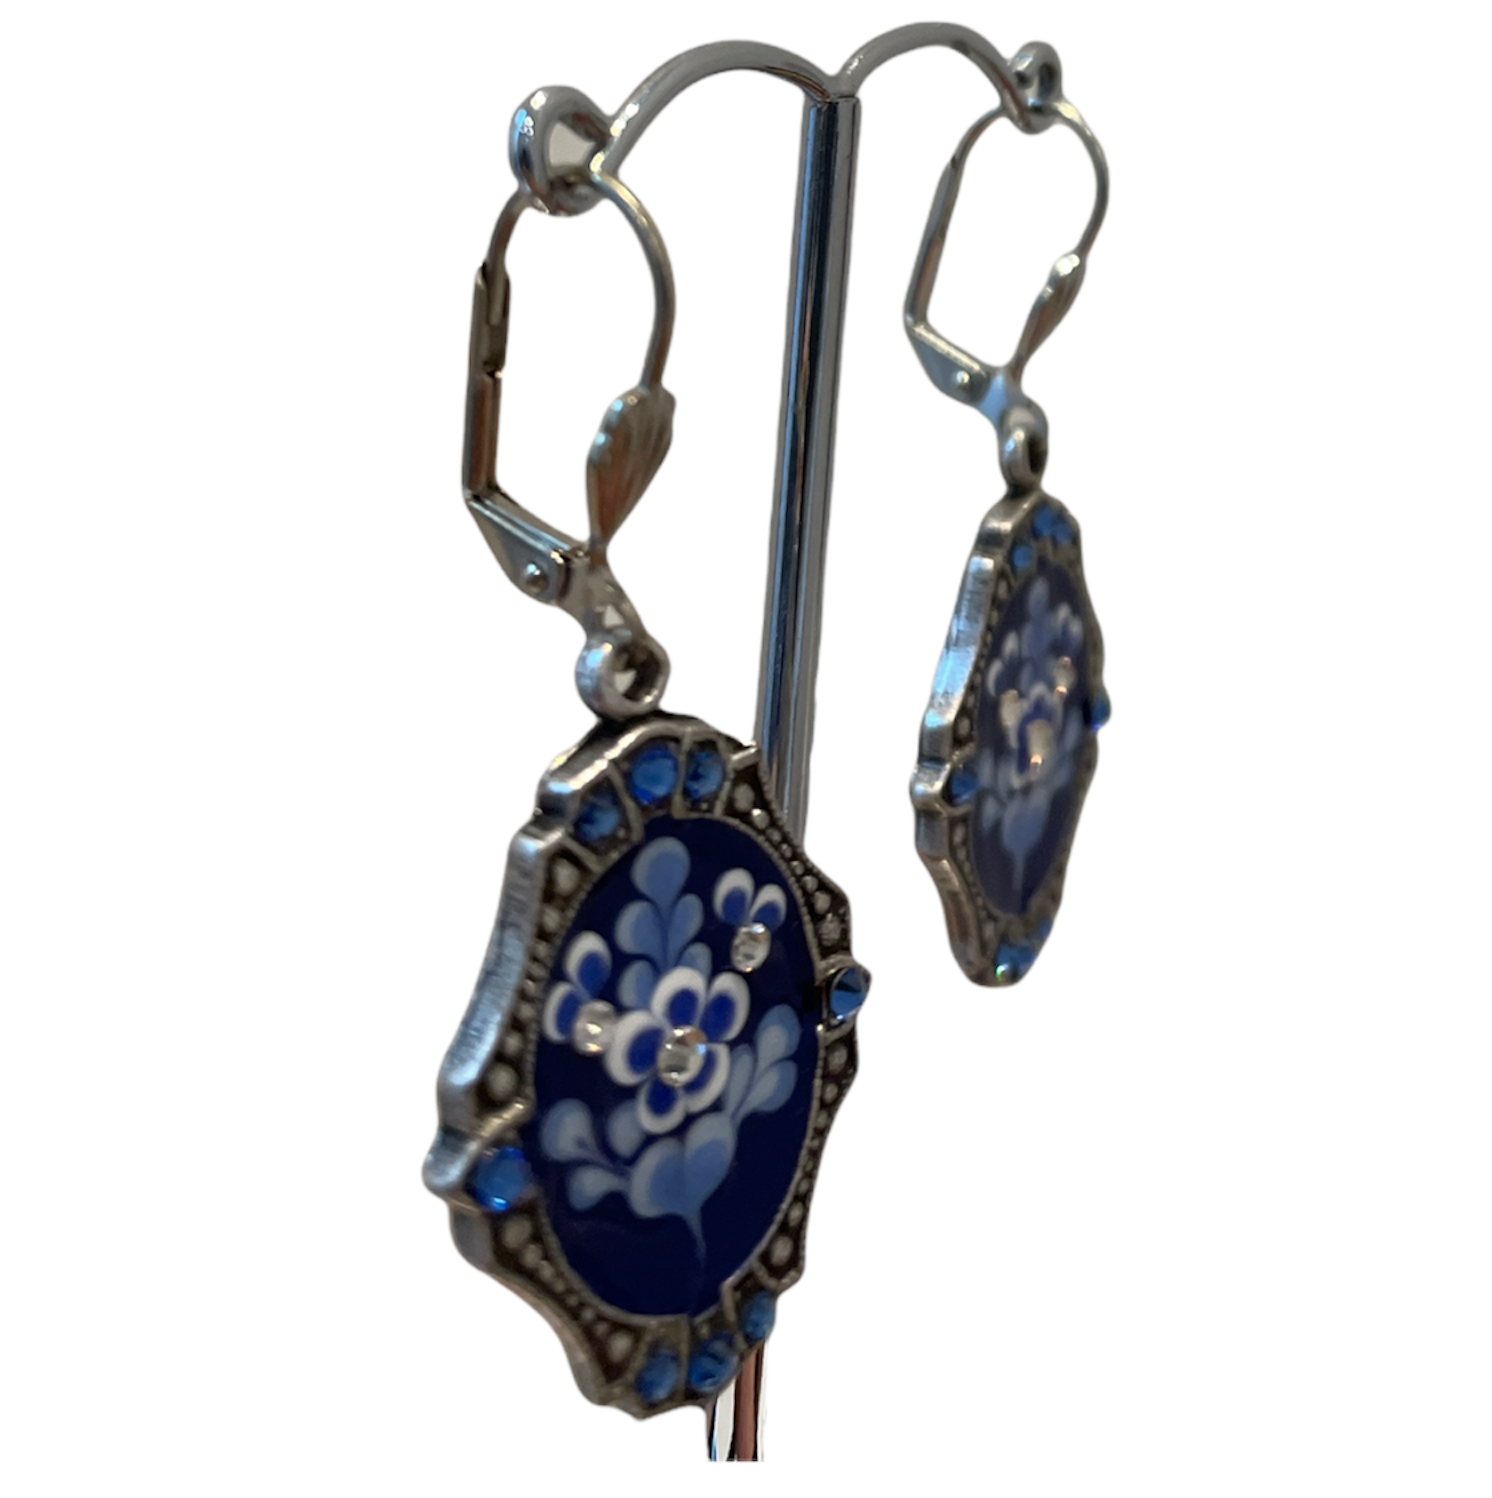 Handmade delft china handpainted enamel earrings with embedded crystal